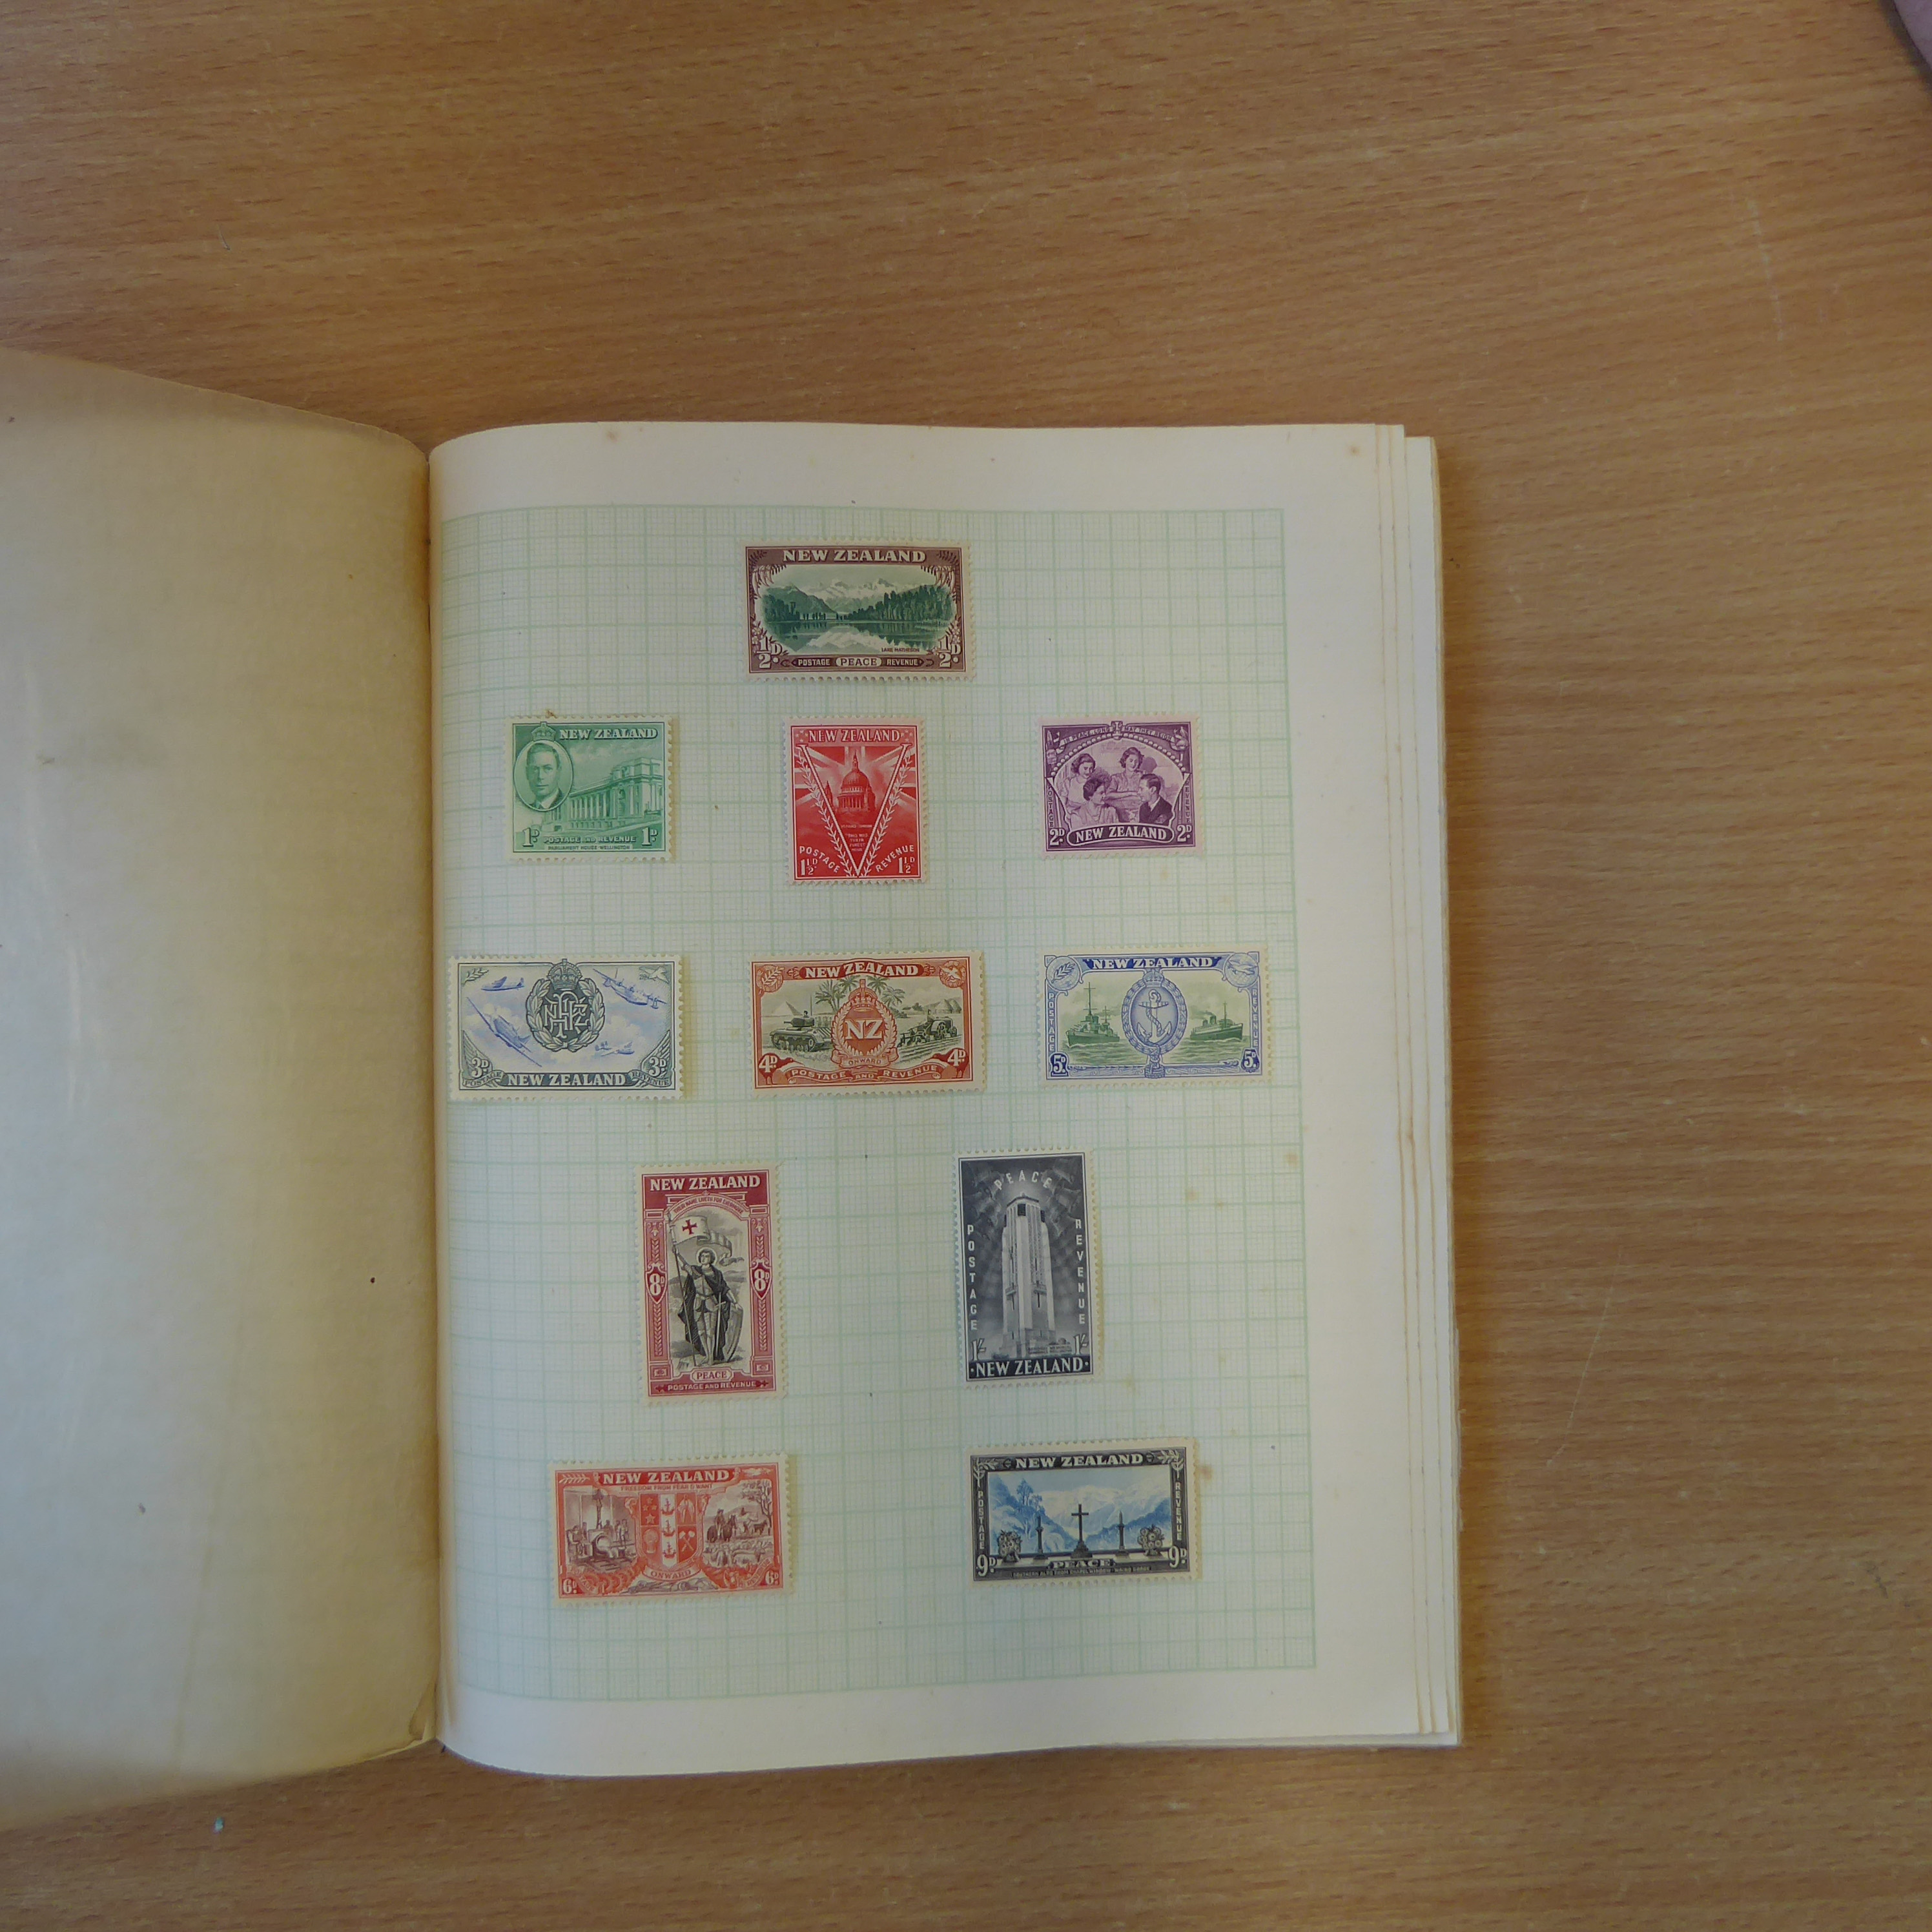 Eight vintage albums, some remaindered world stamps - Image 42 of 109